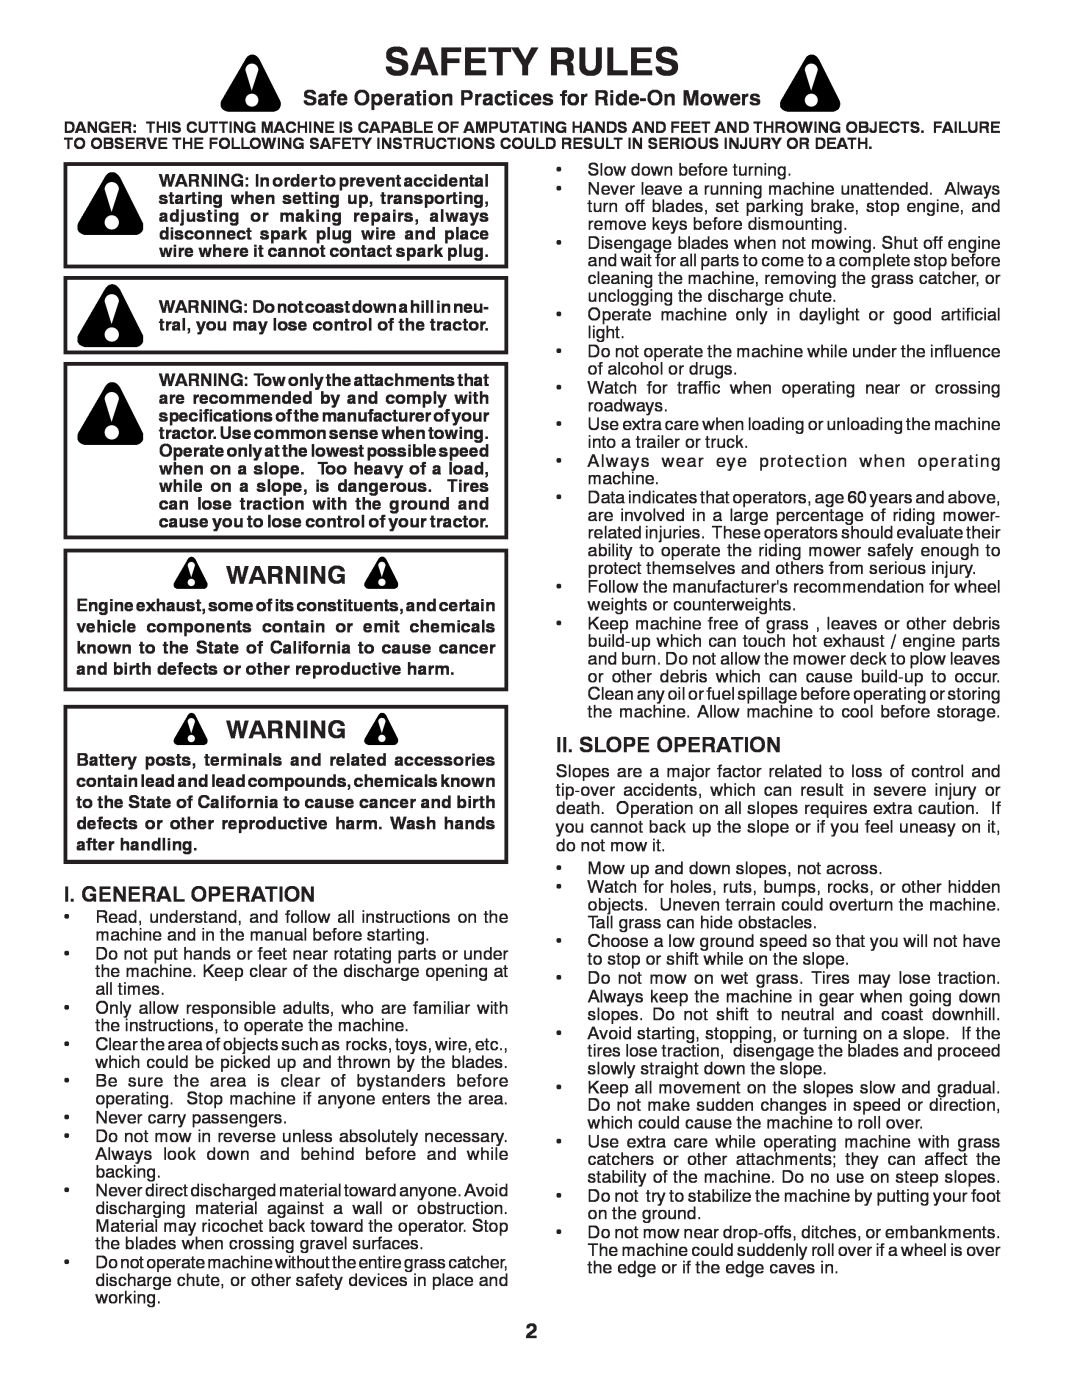 Poulan 96012011200 Safety Rules, Safe Operation Practices for Ride-On Mowers, I. General Operation, Ii. Slope Operation 